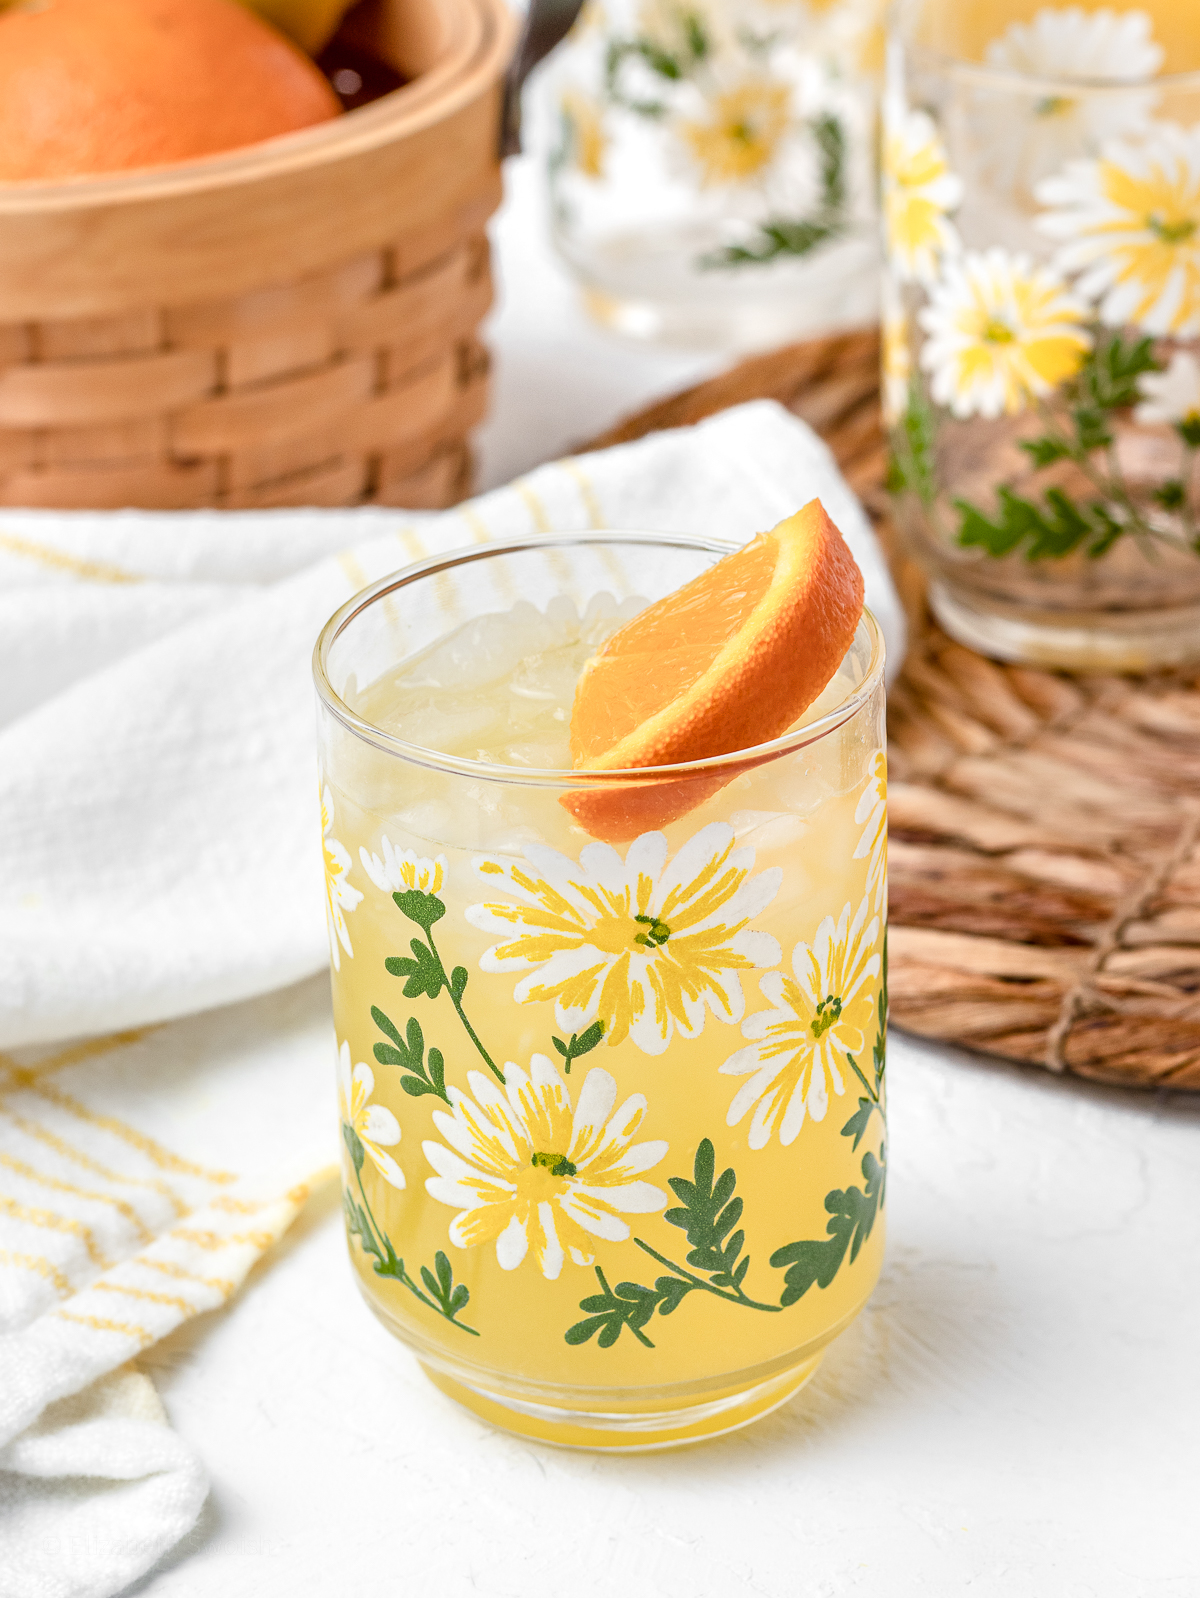 A glass of cold lemonade garnished with an orange wedge.